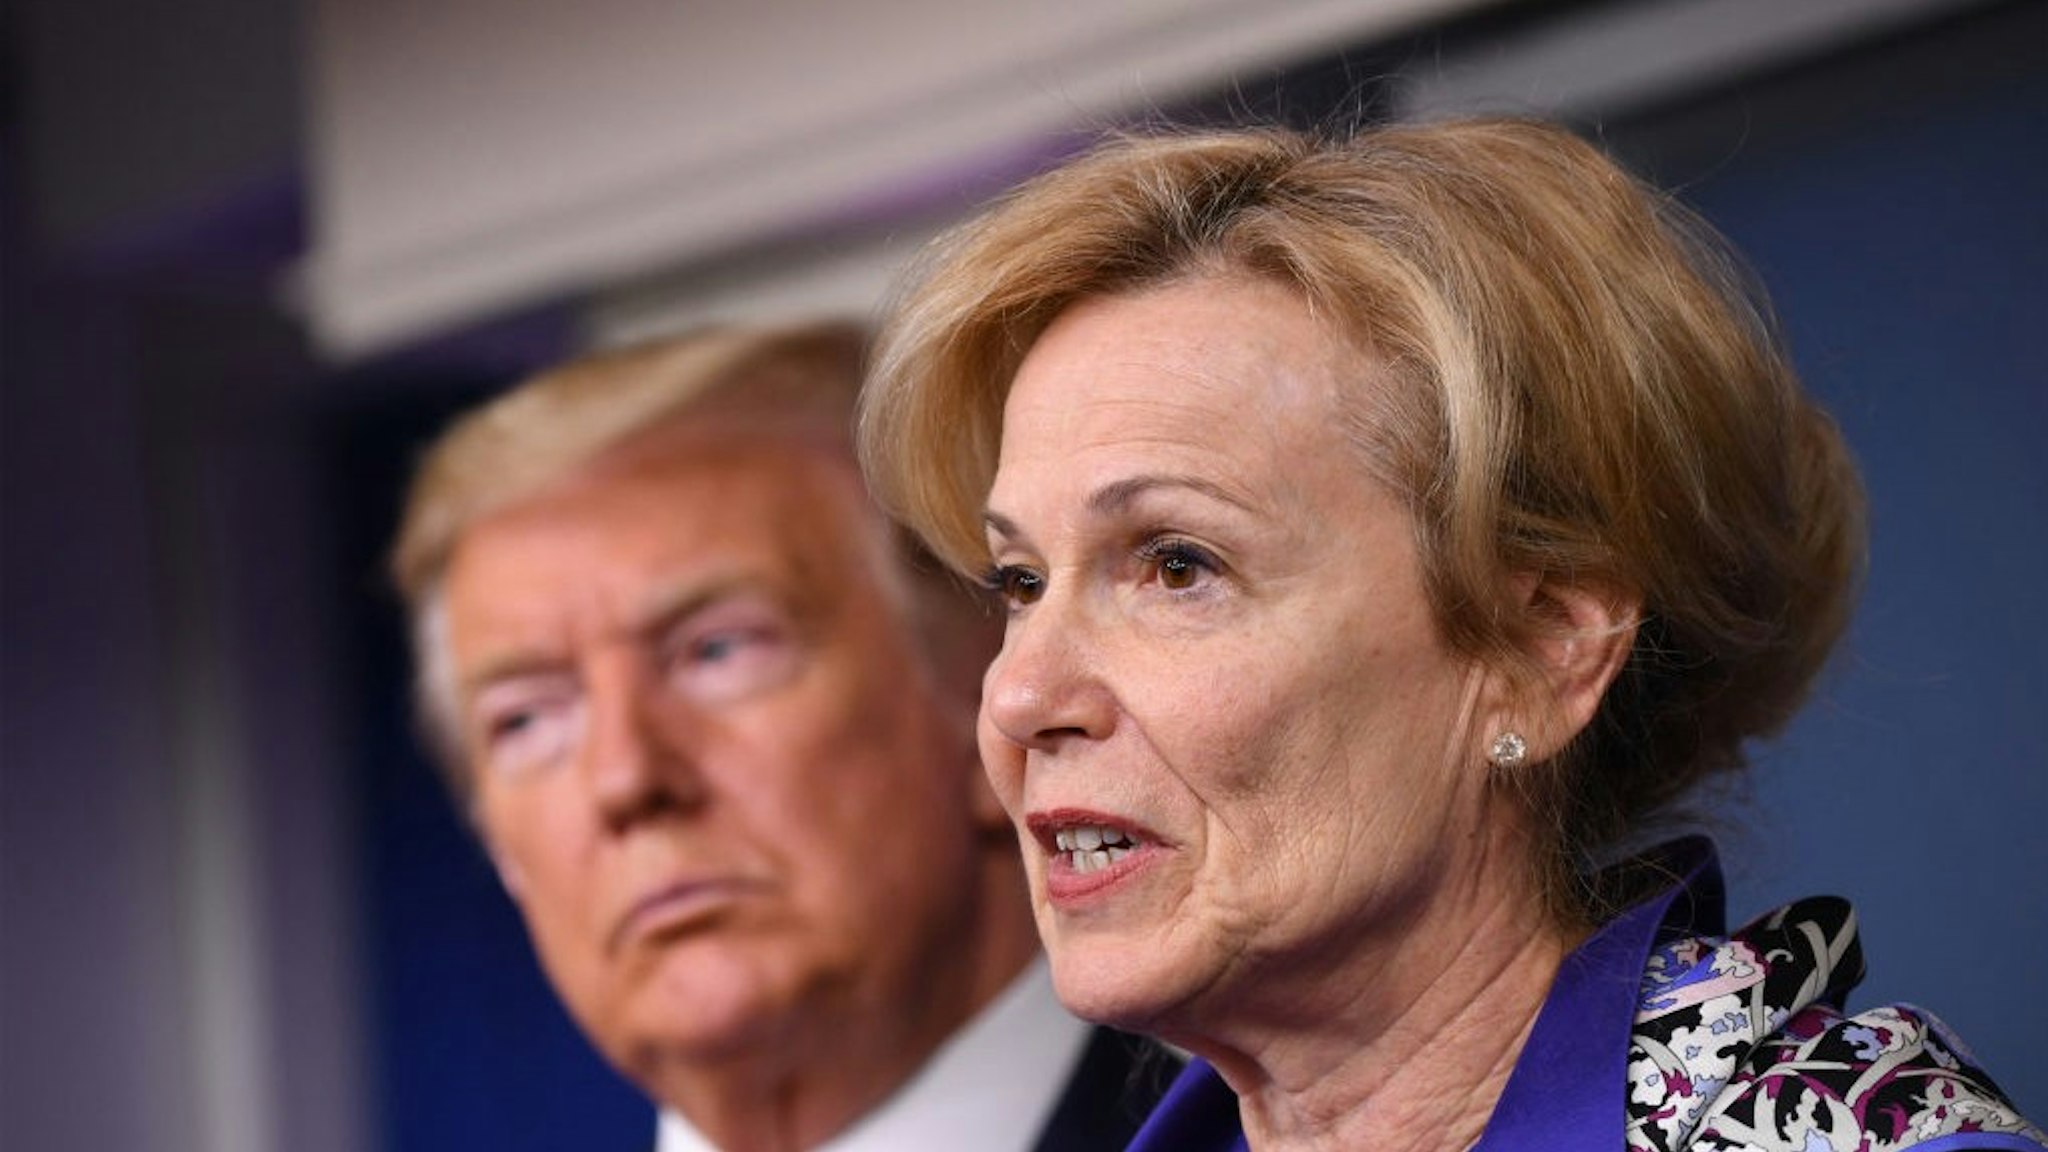 Deborah Birx, coronavirus response coordinator, speaks while U.S. President Donald Trump, left, listens during a Coronavirus Task Force news conference in the briefing room of the White House in Washington, D.C., U.S., on Wednesday, March 18, 2020. Trump invoked the Defense Production Act, allowing the government to boost production of masks and protective equipment. Europe surpassed China in the number of coronavirus infections. Photographer: